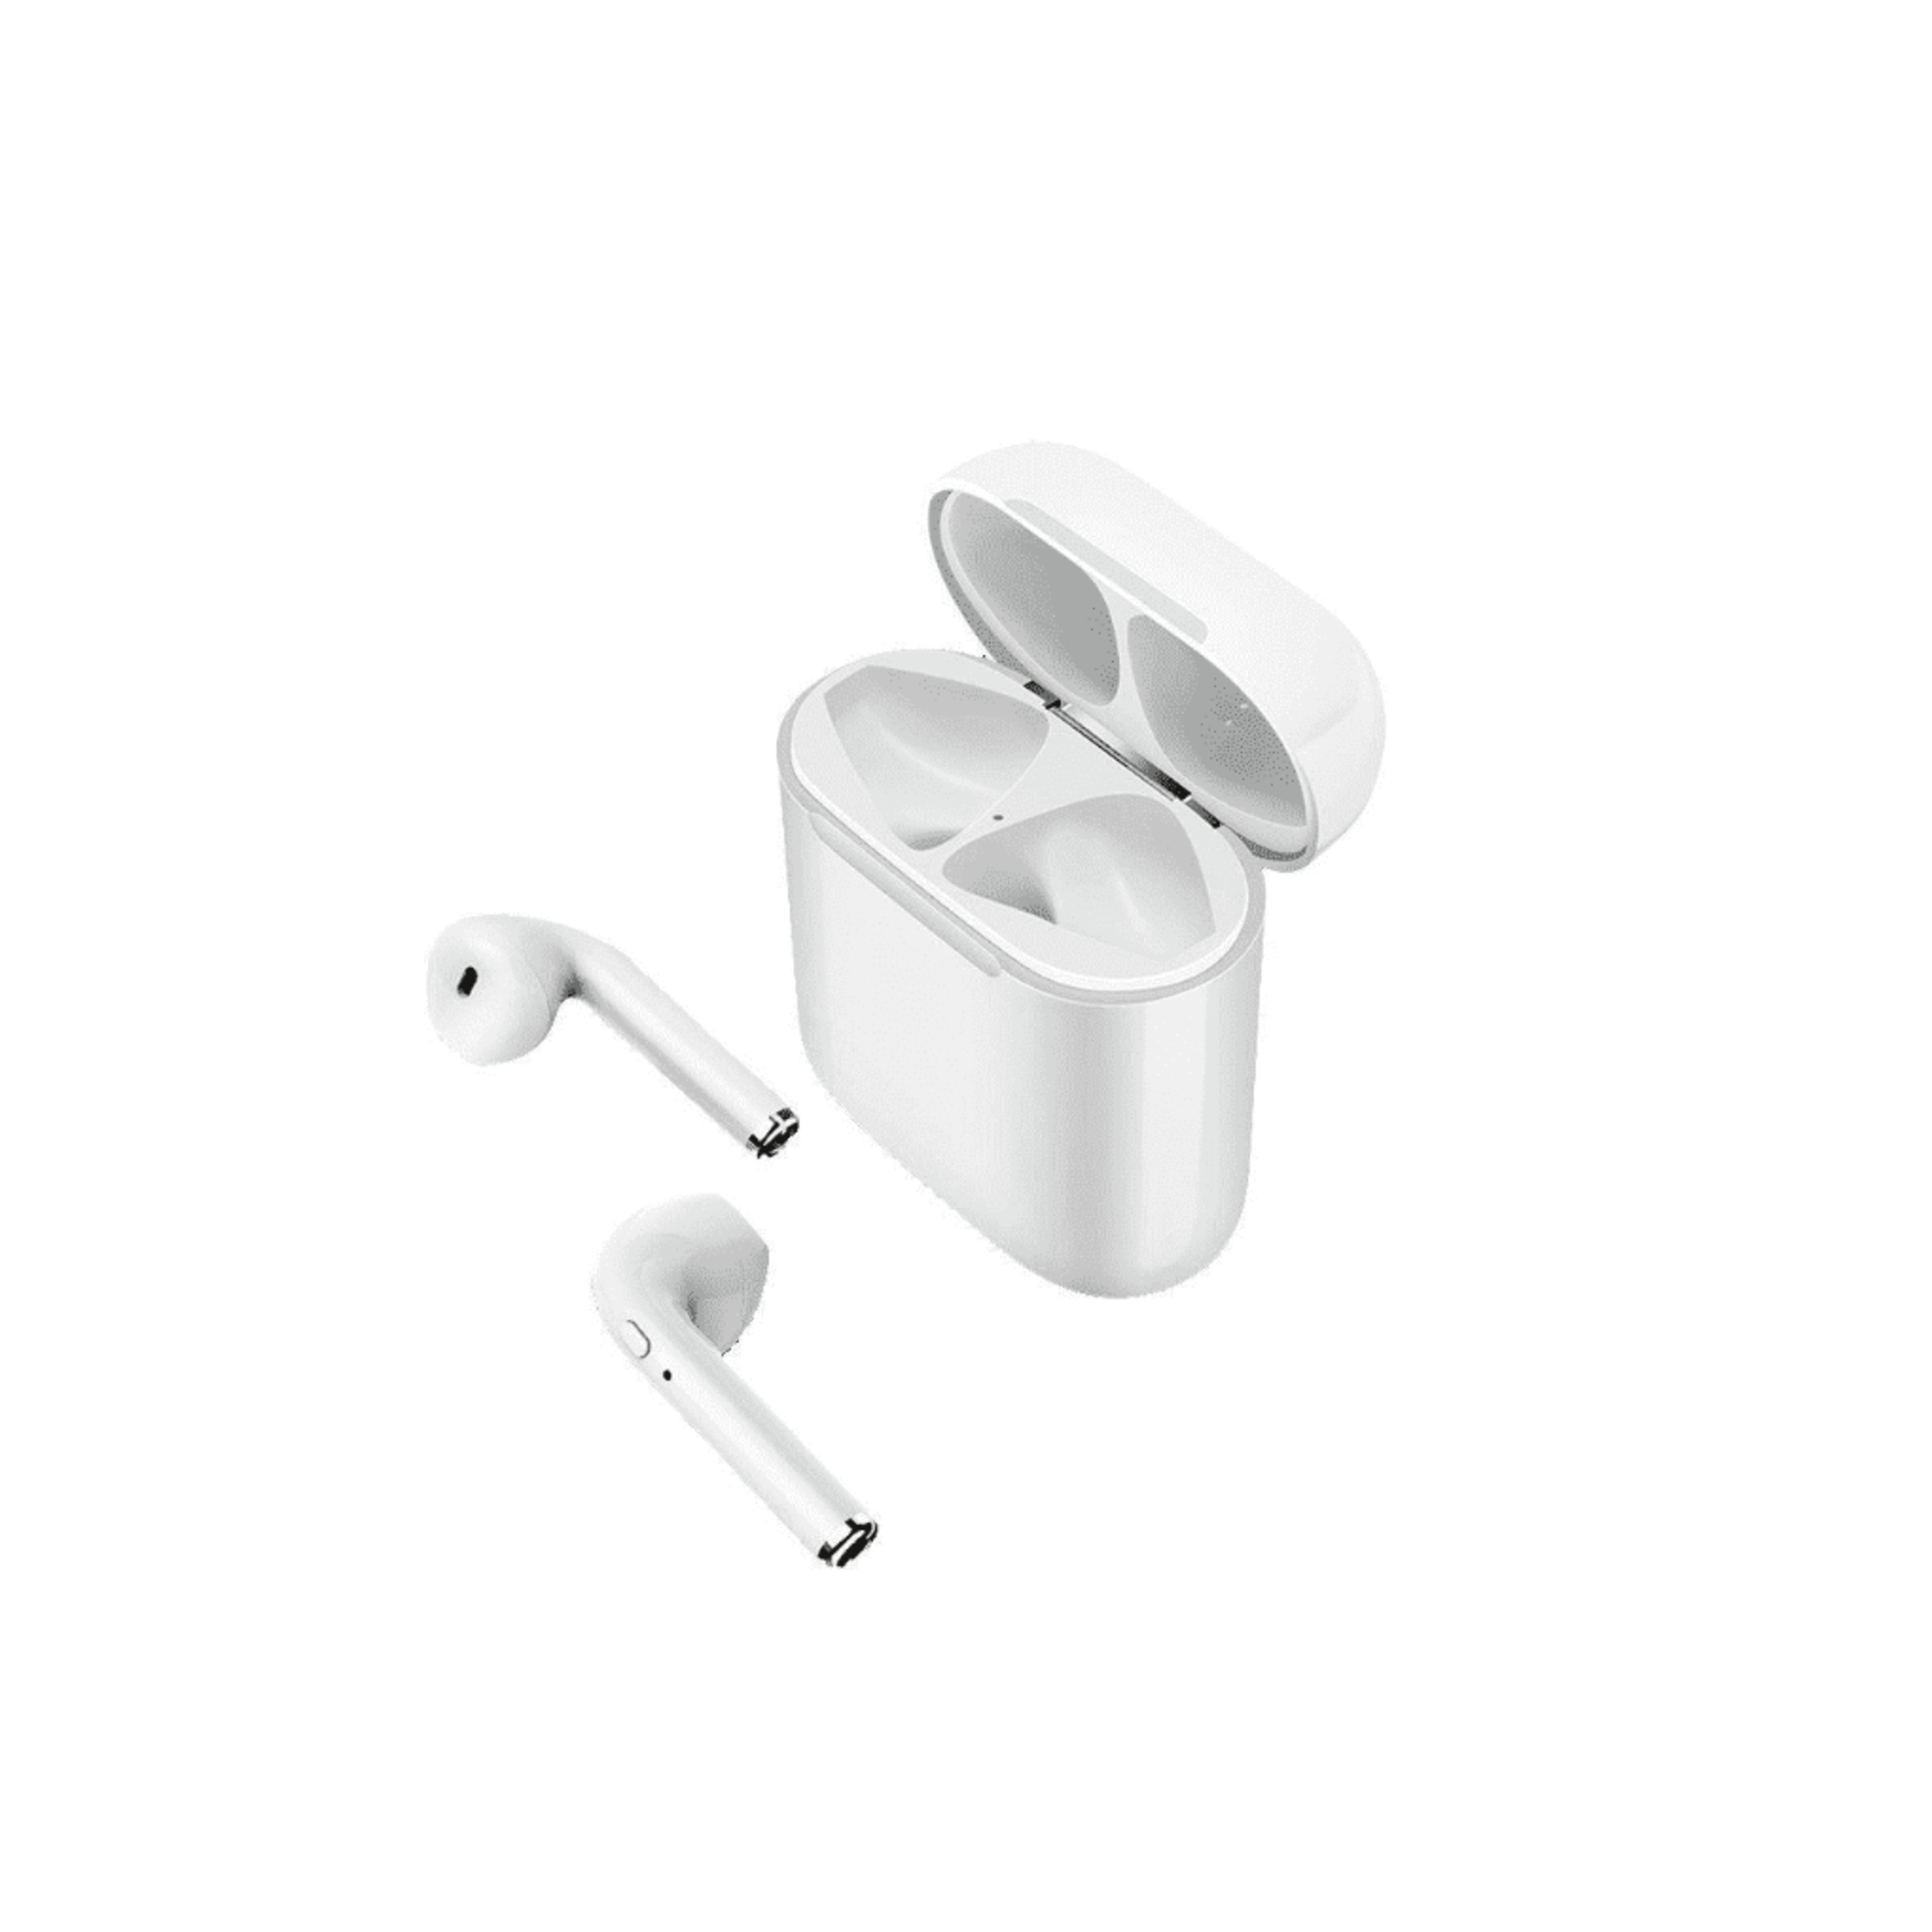 Auriculares Estéreo Wireless Muvit - blanco - 